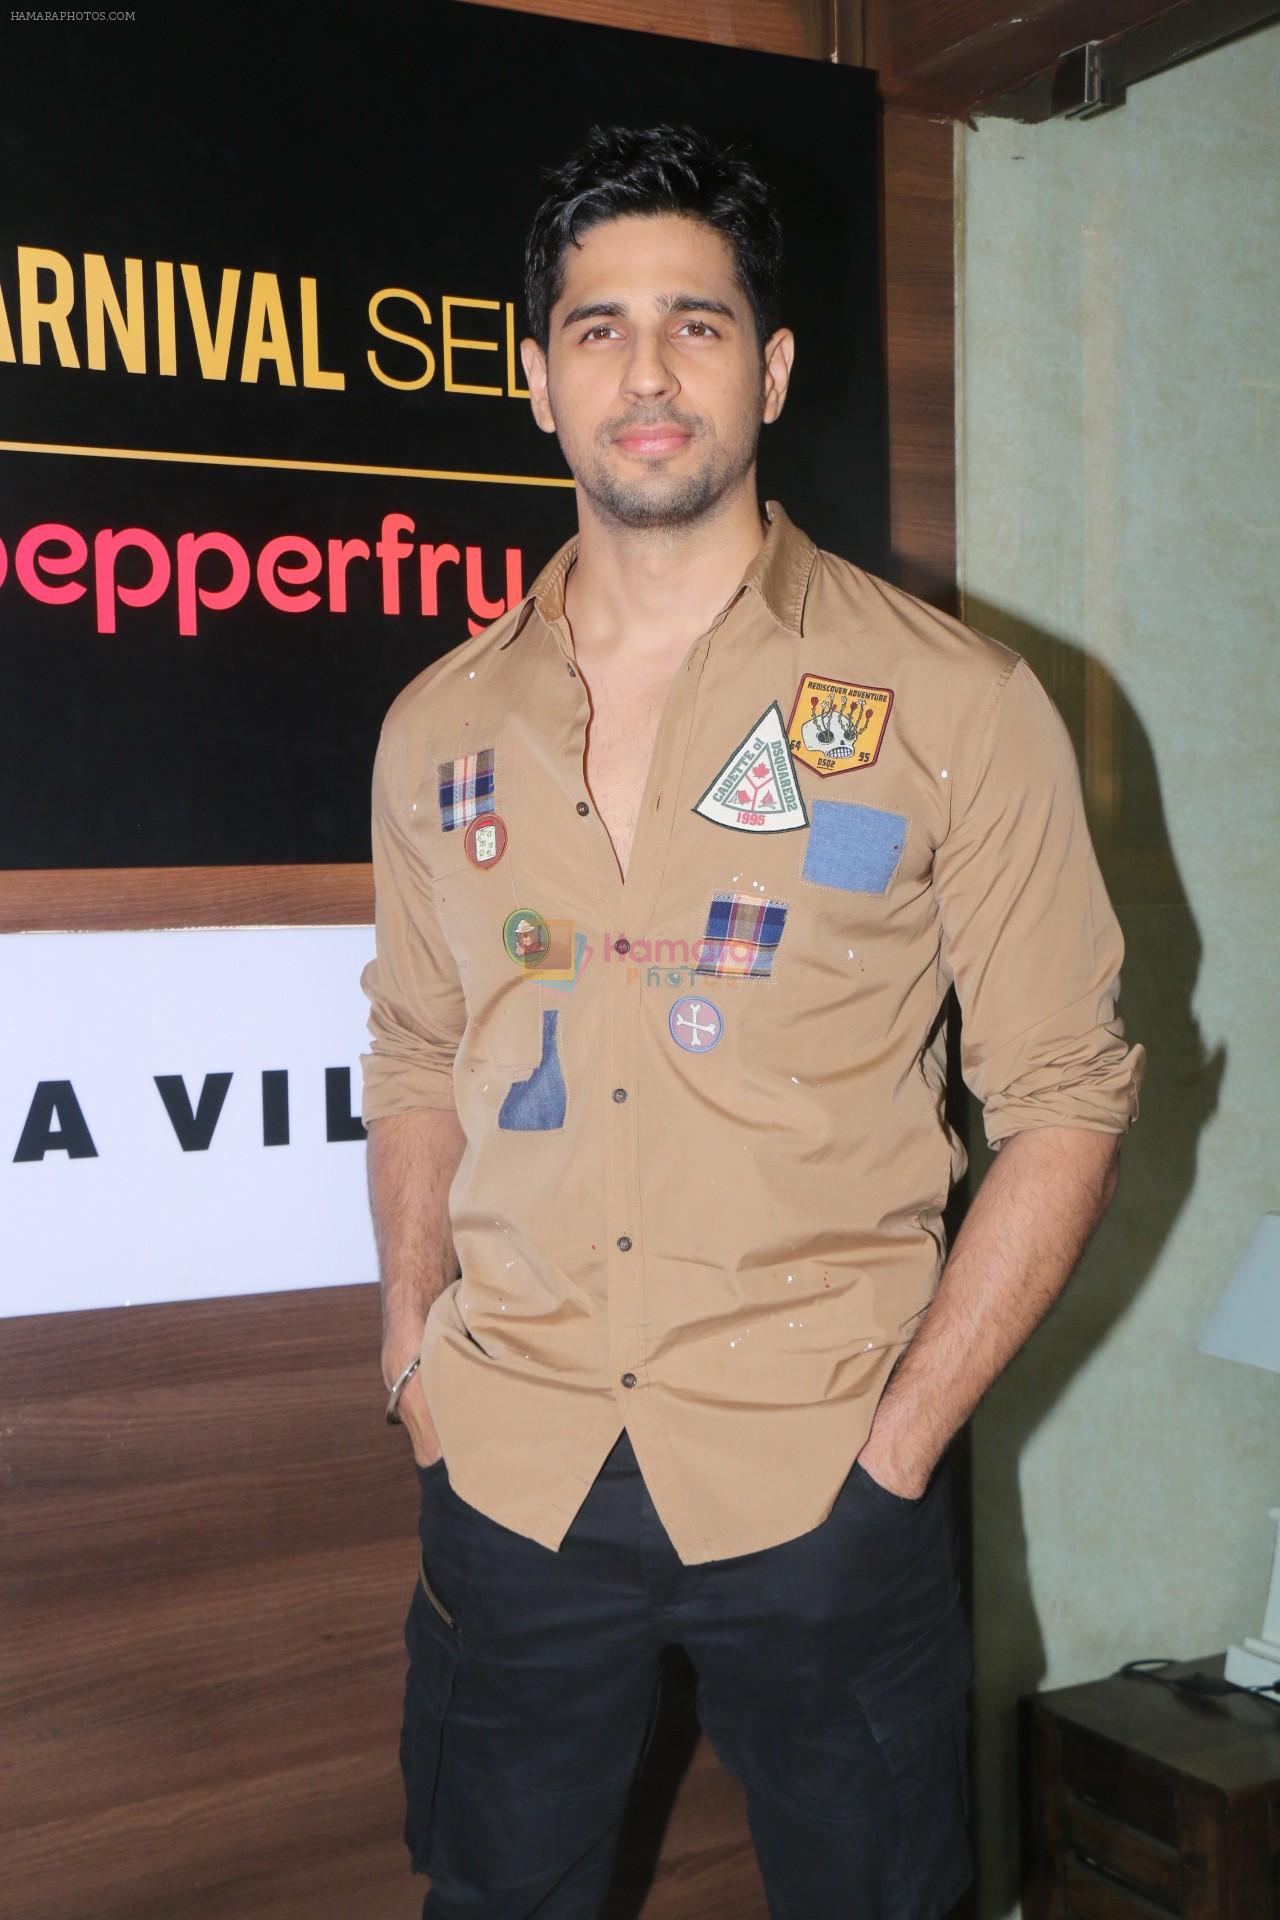 Sidharth Malhotra at the launch of Carnival cinema Lounge in carnival cinema, Andheri on 16th Feb 2018